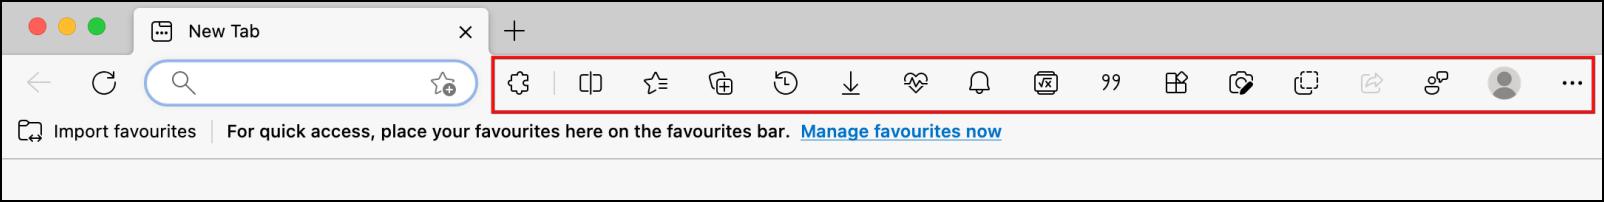 Remove Unwanted Toolbar Bloatware from Edge